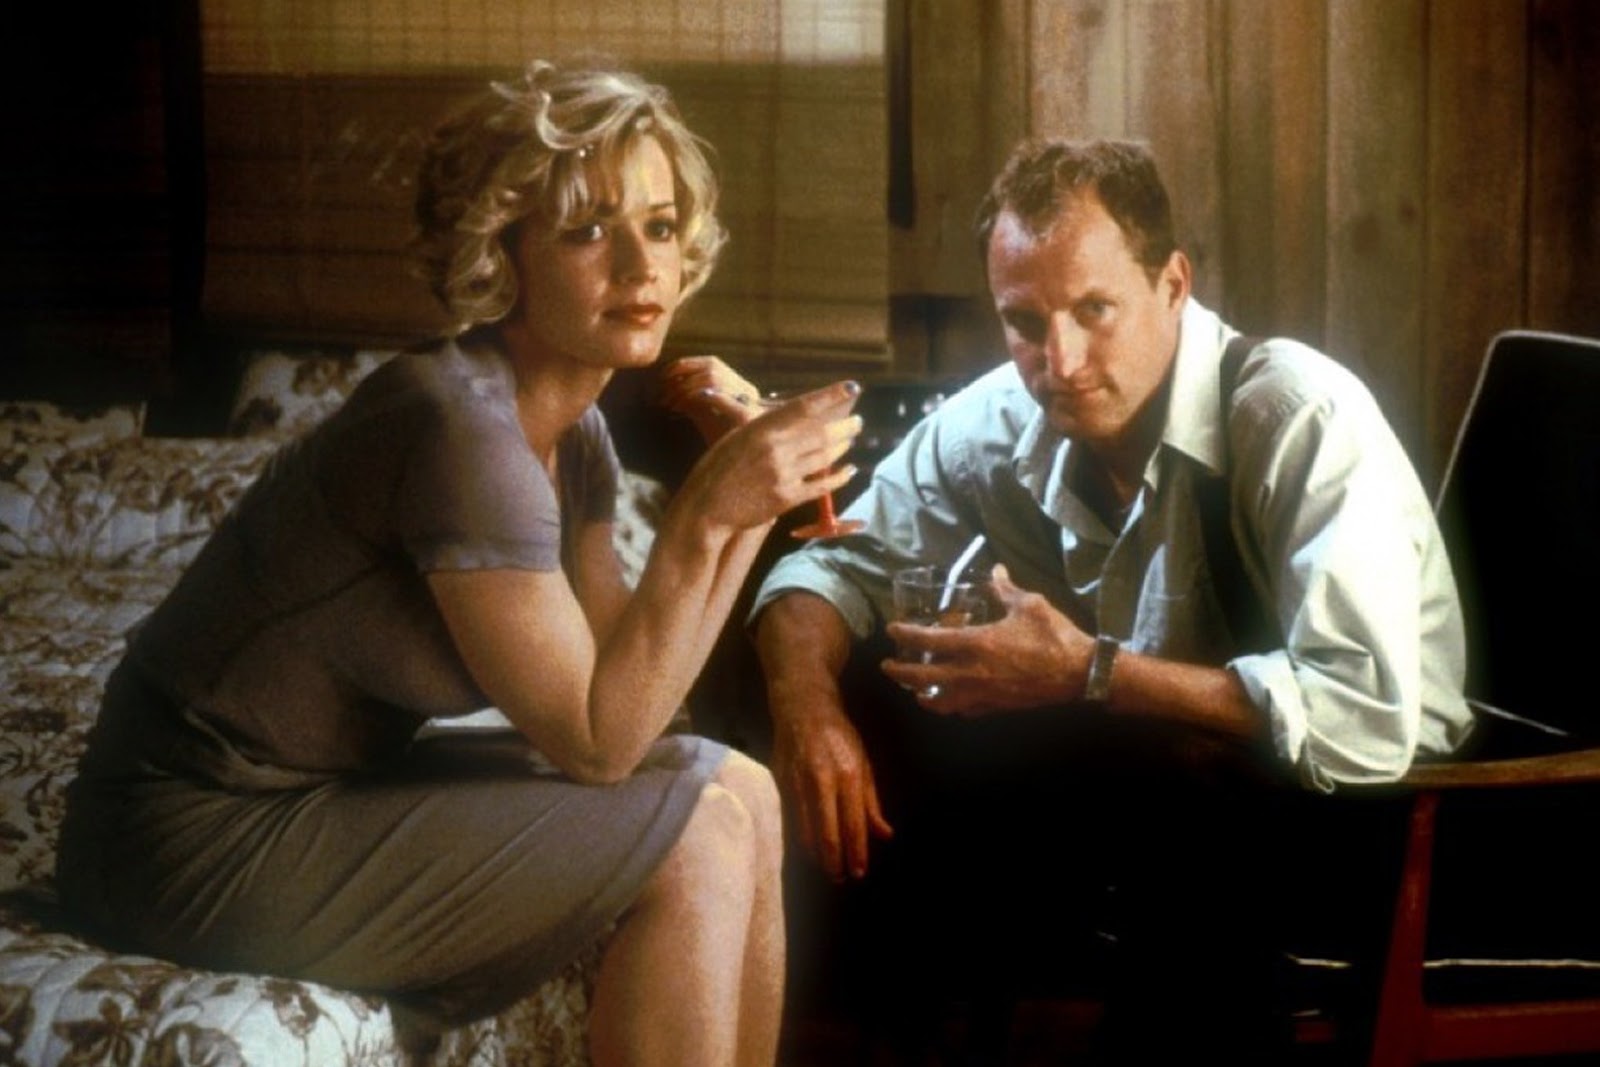 Woody Harrelson as Harry Barber and Elisabeth Shue as Mrs. Donnelly / Rhea Malroux